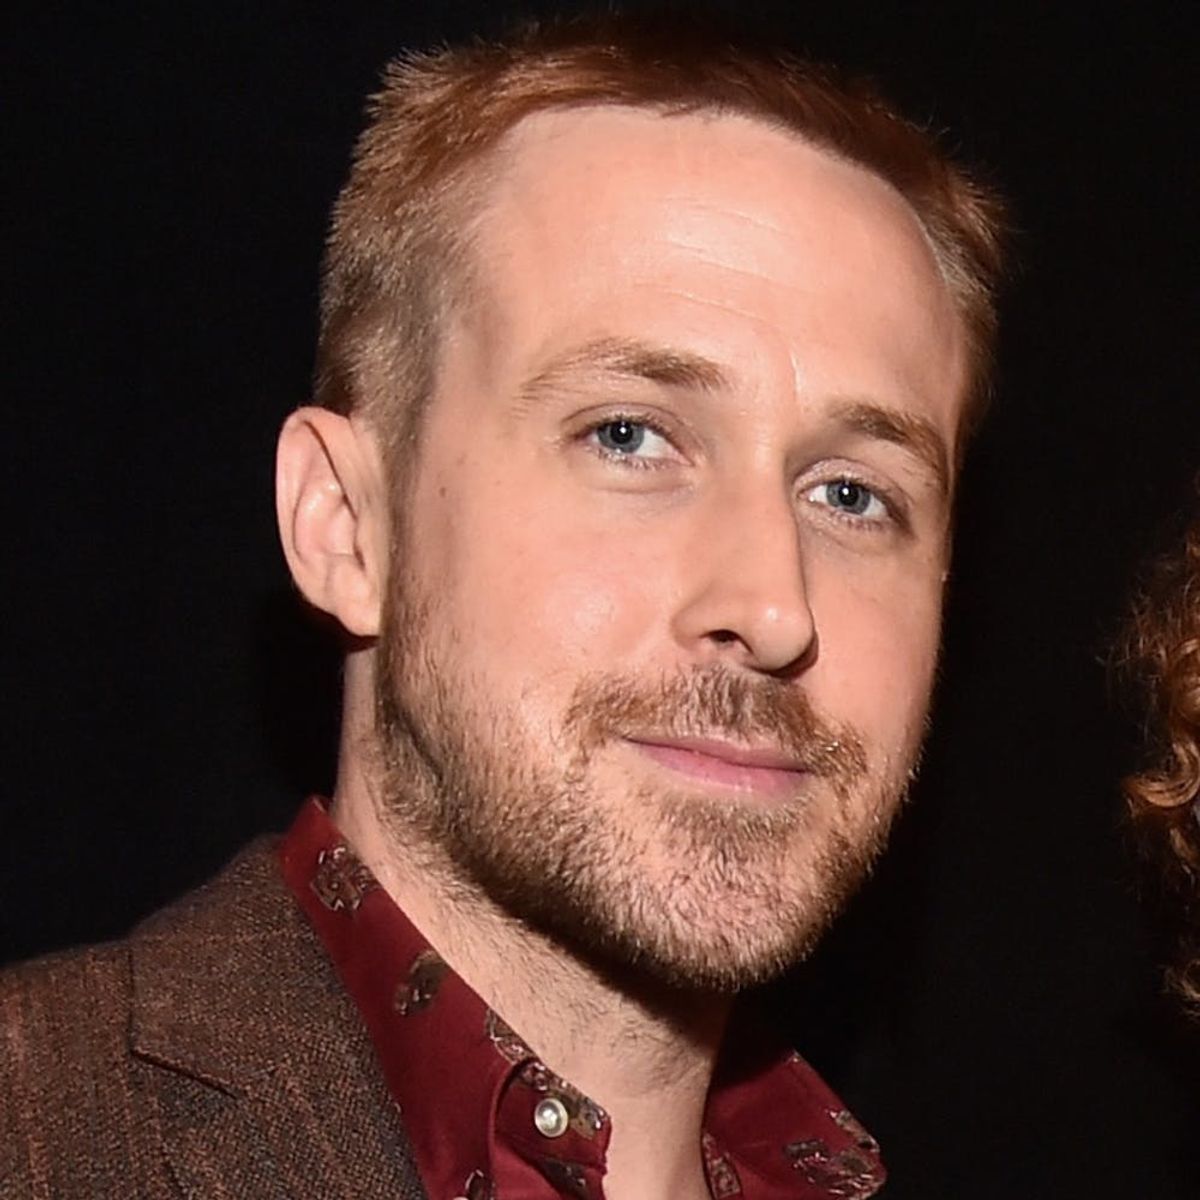 Ryan Gosling Says He Got a “Mild Concussion”  While Filming ‘First Man’